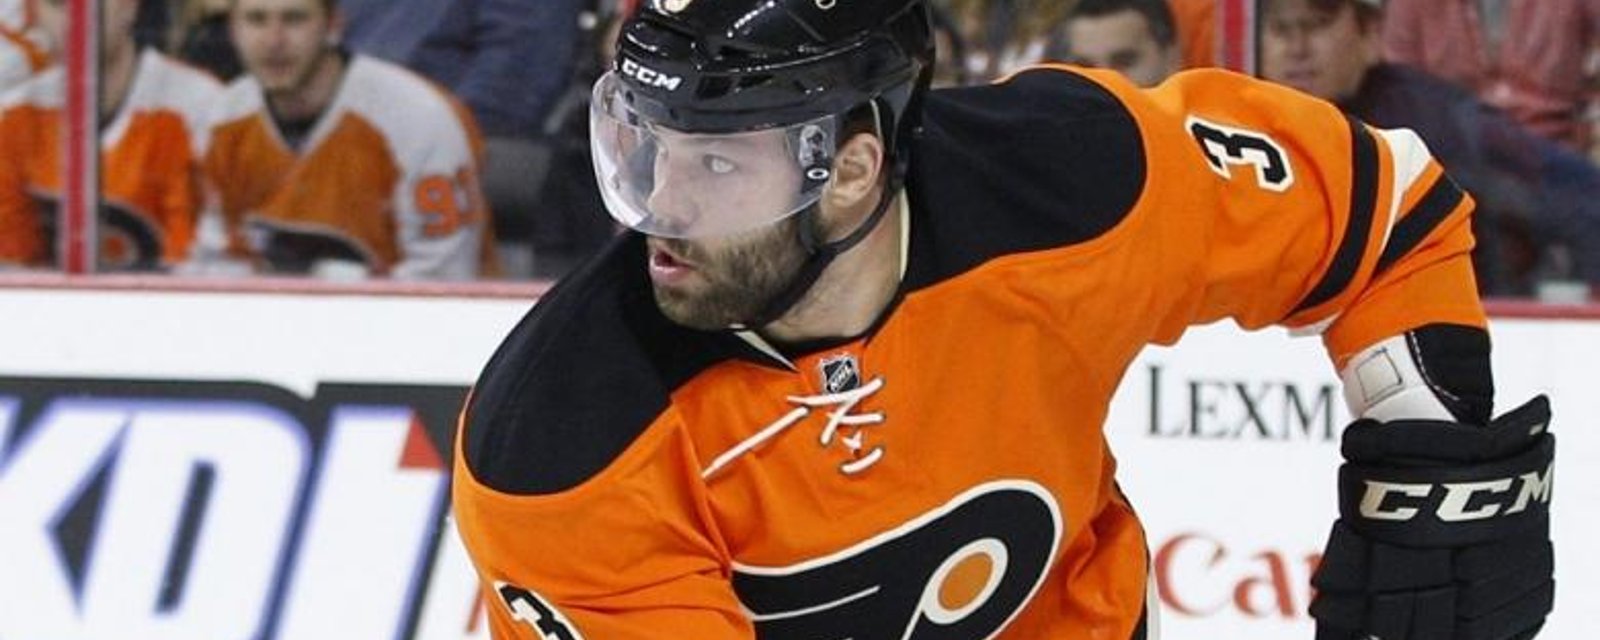 Report: Flyers have am interesting offer on the table for one of their defensemen.